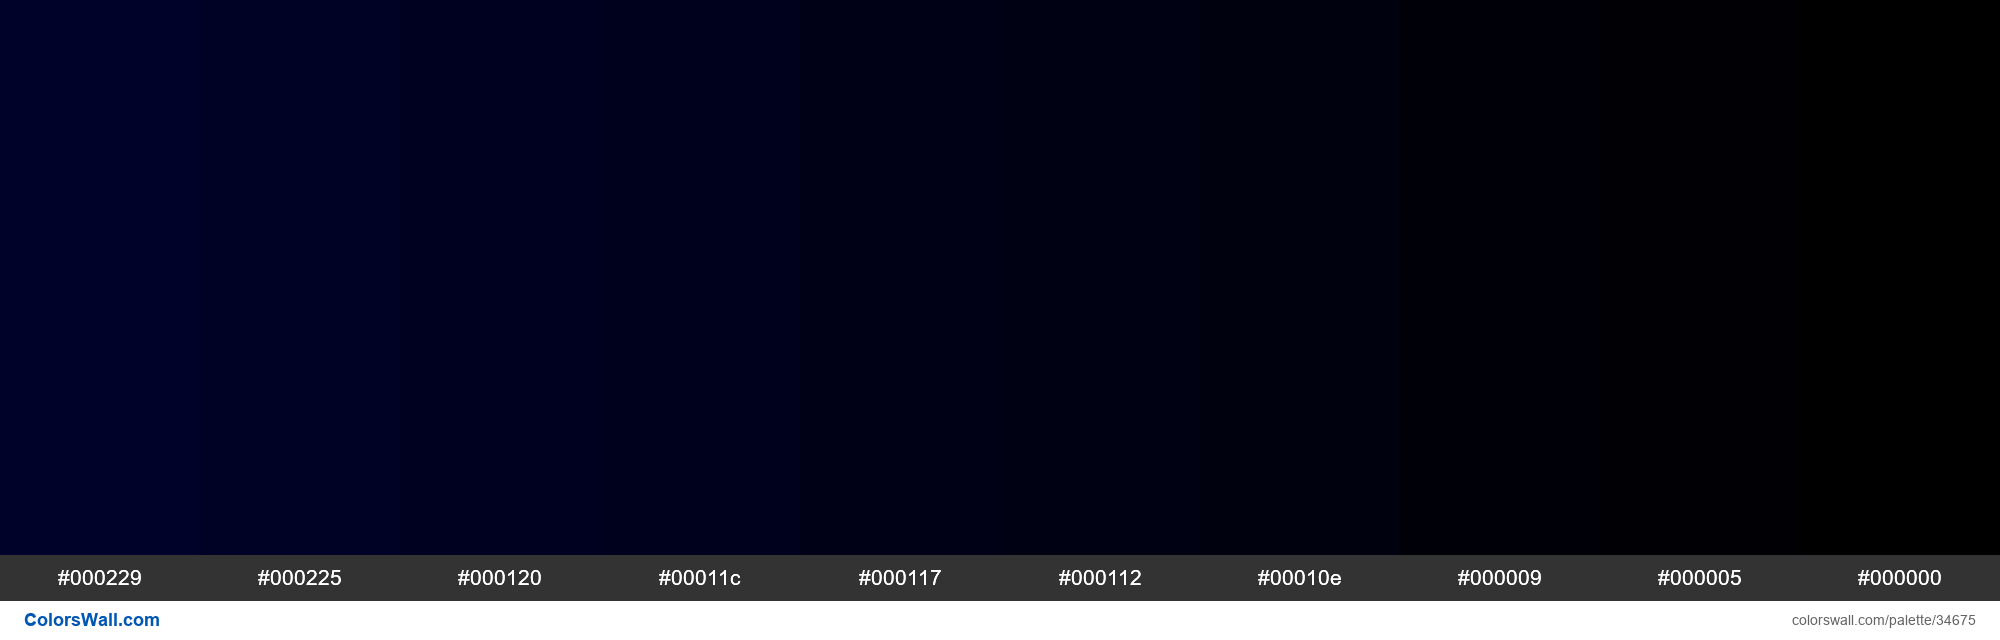 Shades Xkcd Color Dark Navy Blue 00022e Hex 34675 Colorswall 